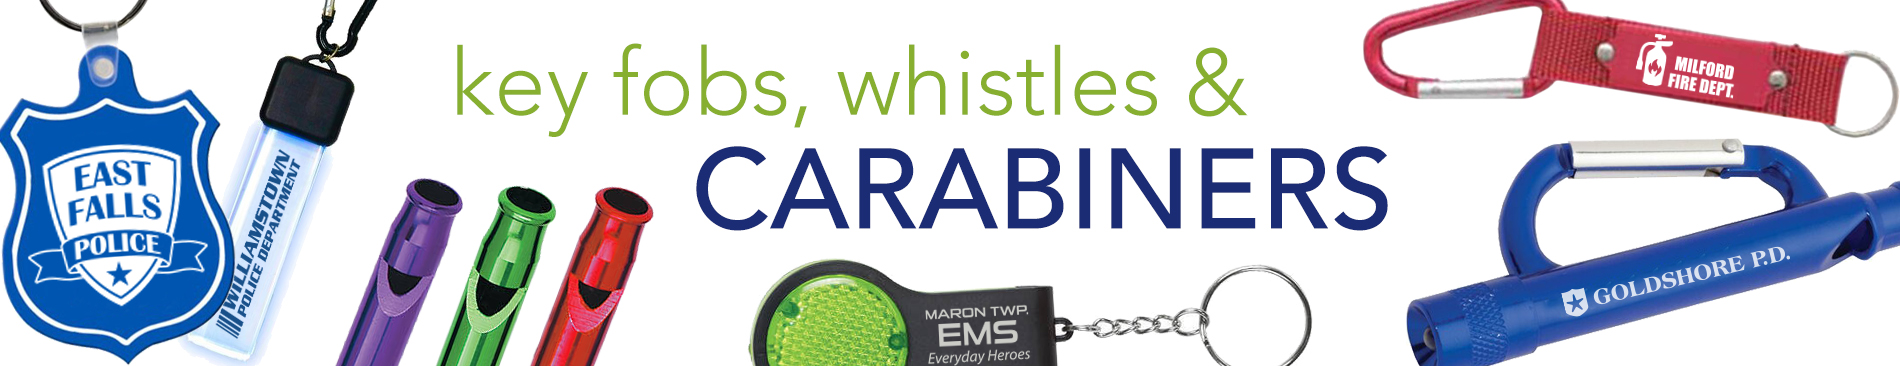 key fobs, whistles, carabiners